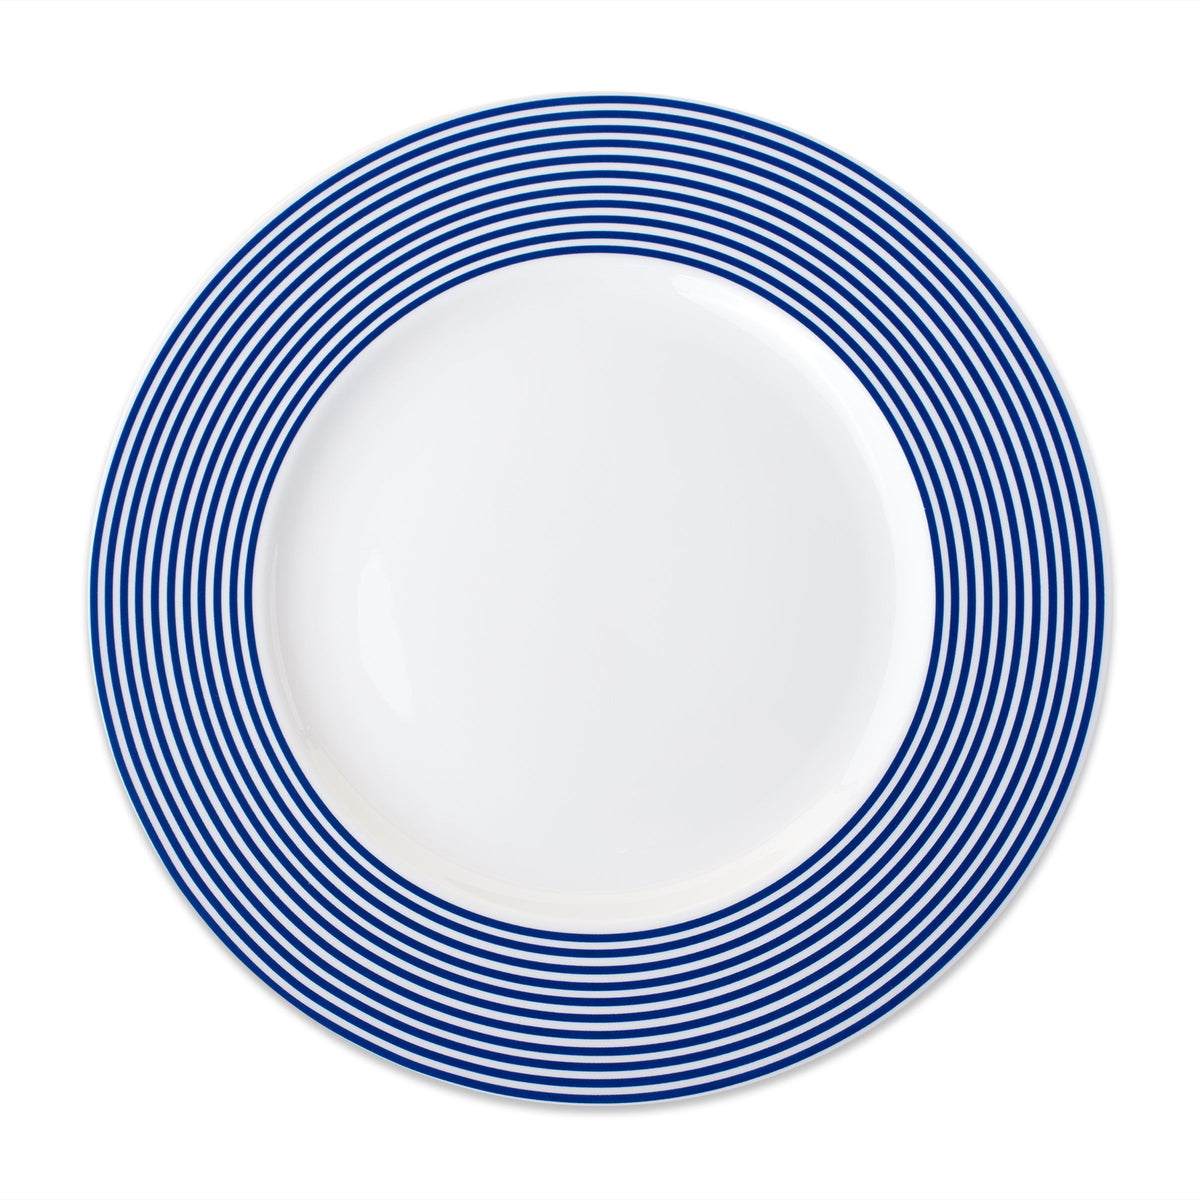 A Newport Racing Stripe Rimmed Dinner Plate from Caskata Artisanal Home, featuring blue and white stripes on a white background with porcelain layers.